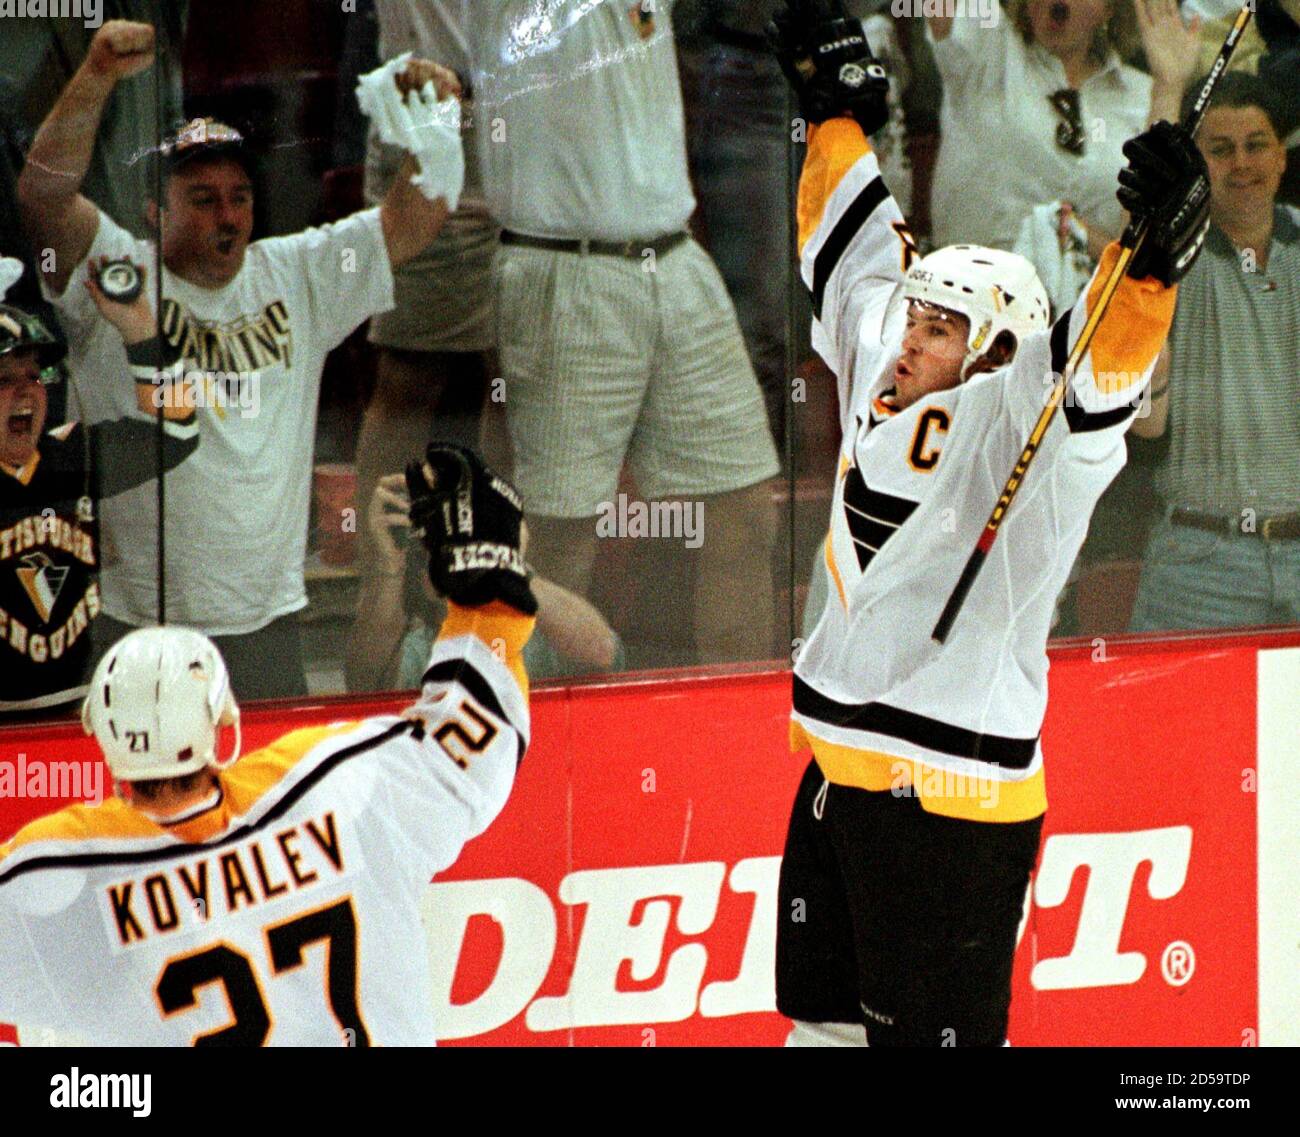 pittsburgh-penguins-jaromir-jagr-r-celebrates-after-scoring-the-tying-goal-against-the-new-jersey-devils-with-assists-by-german-titov-l-and-alexei-kovalev-during-the-third-period-of-game-6-of-the-first-round-of-nhl-playoffs-in-pittsburgh-on-may-2-jagr-then-scored-the-winning-goal-in-overtime-to-win-the-game-3-2-jcsv-2D59TDP Fast-Track Your Beachhandball2016